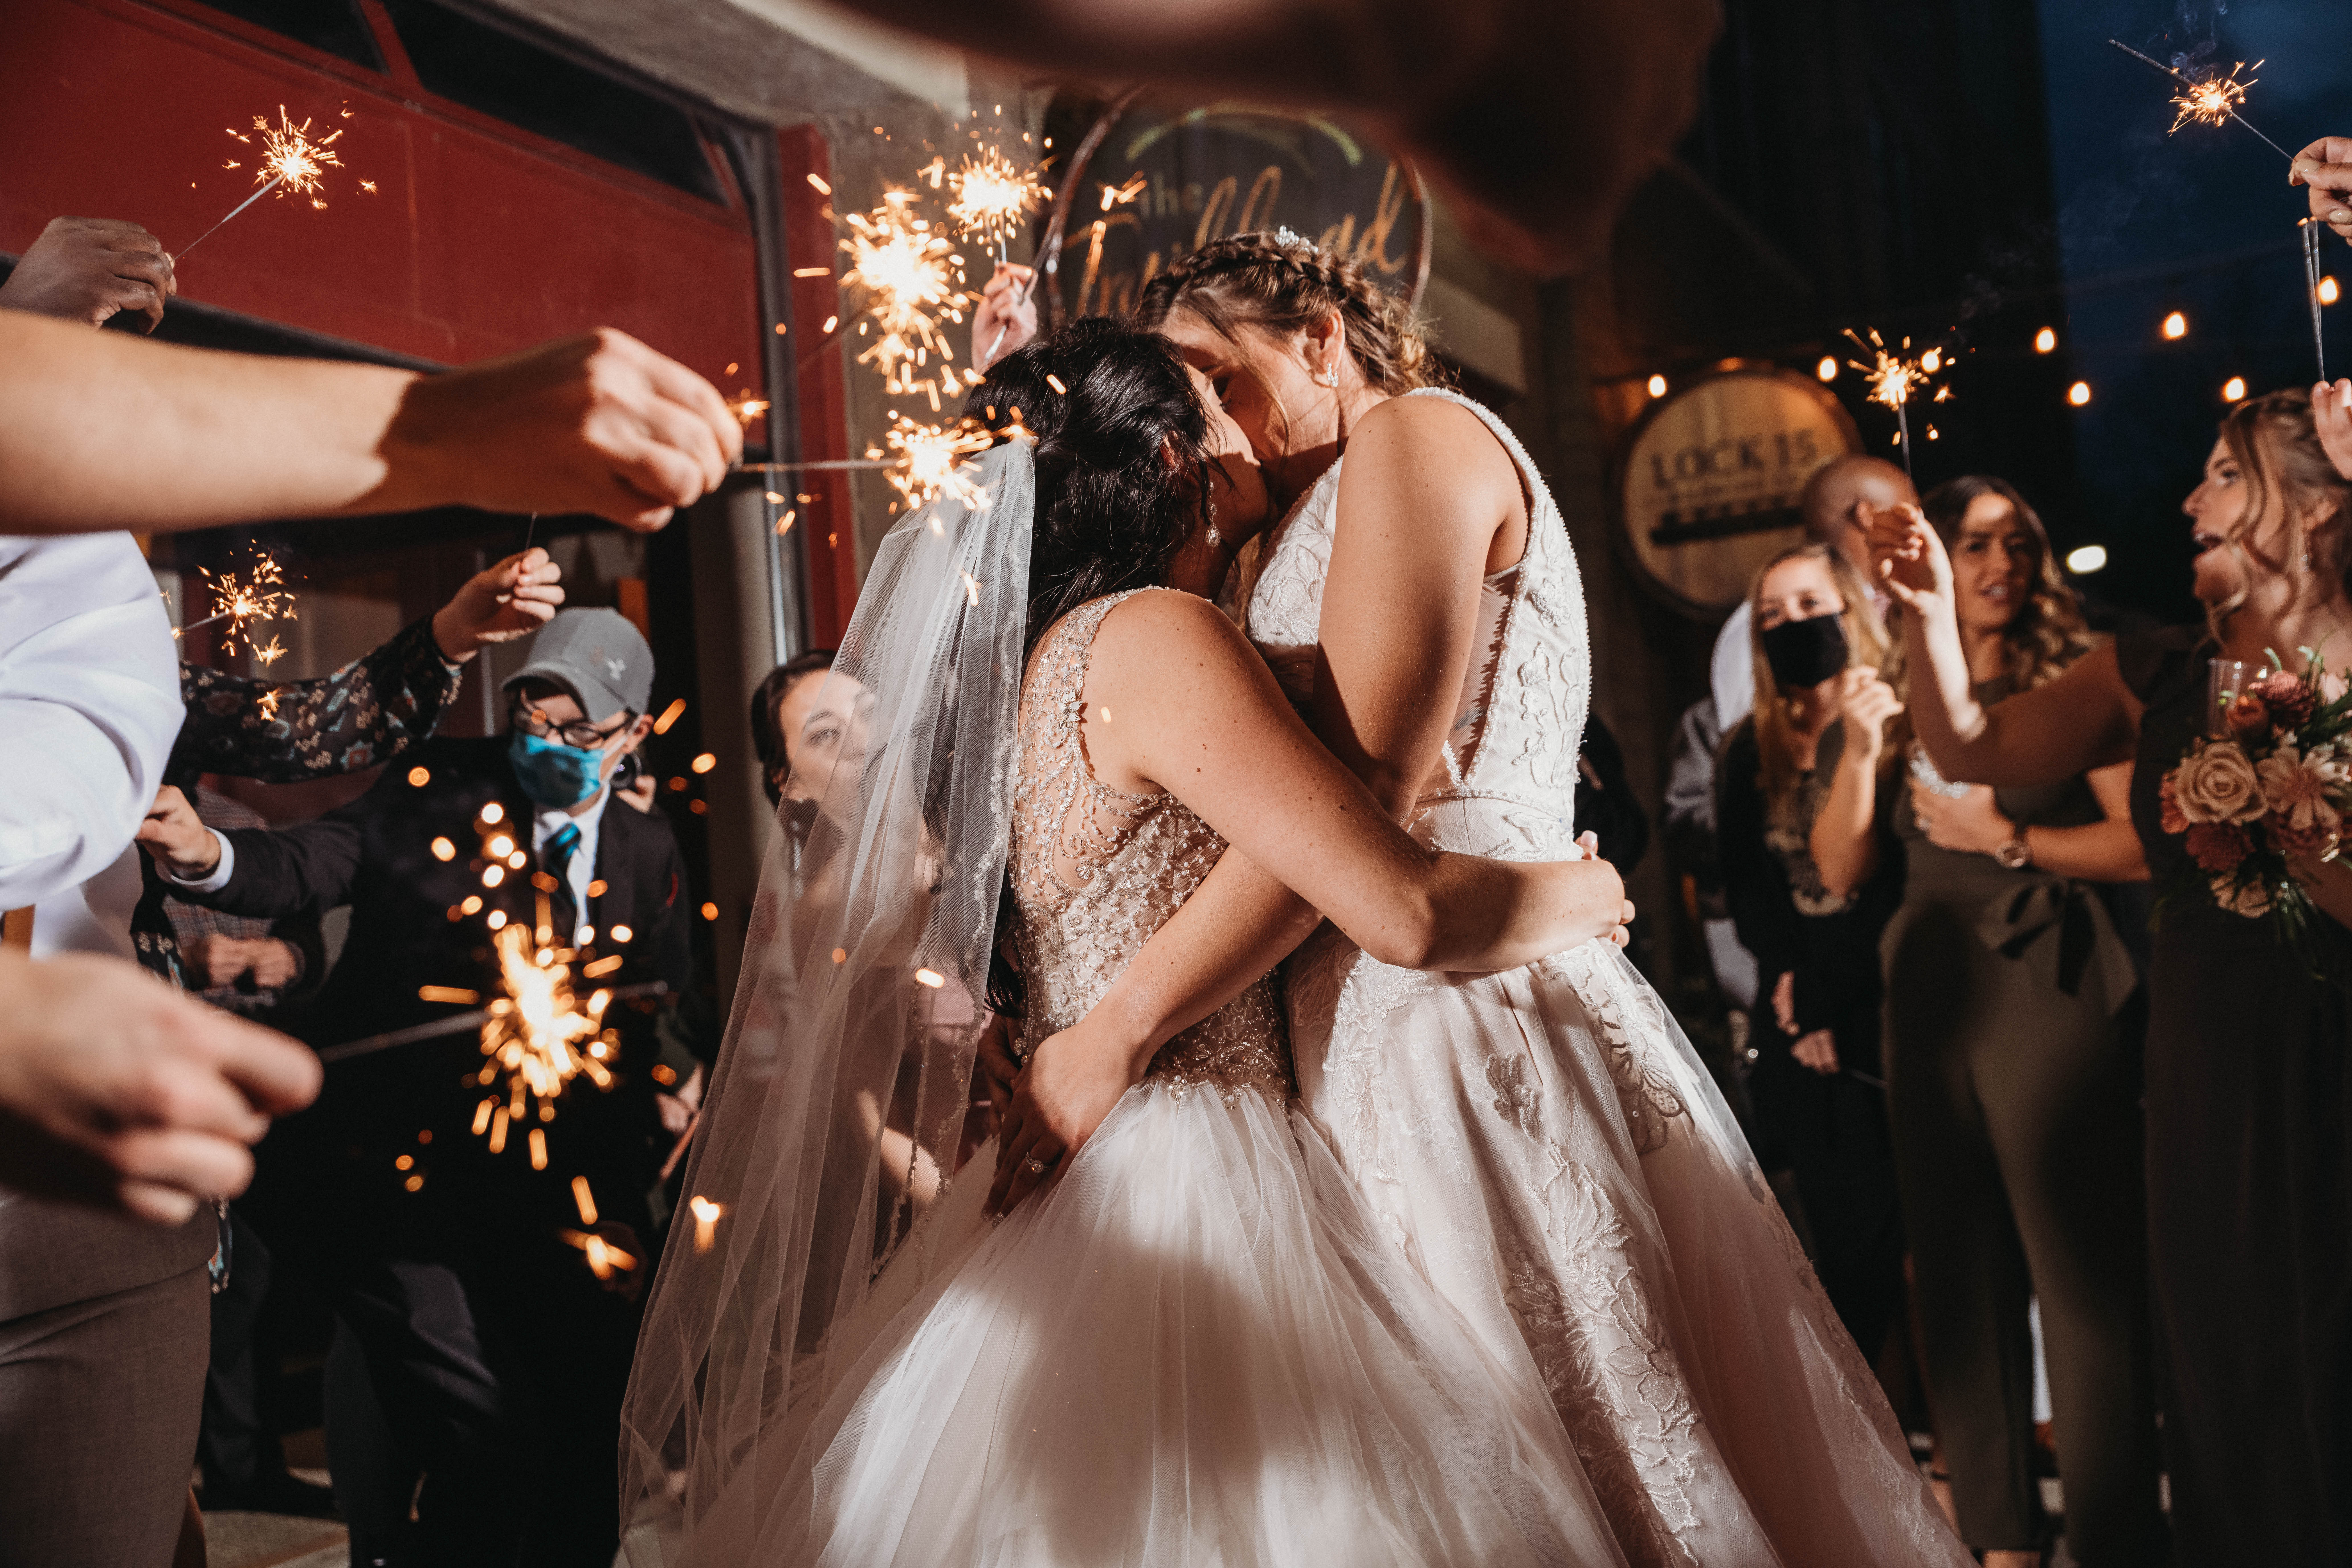 Brides kiss at the sparkler exit of their LGBTQ friendly wedding.